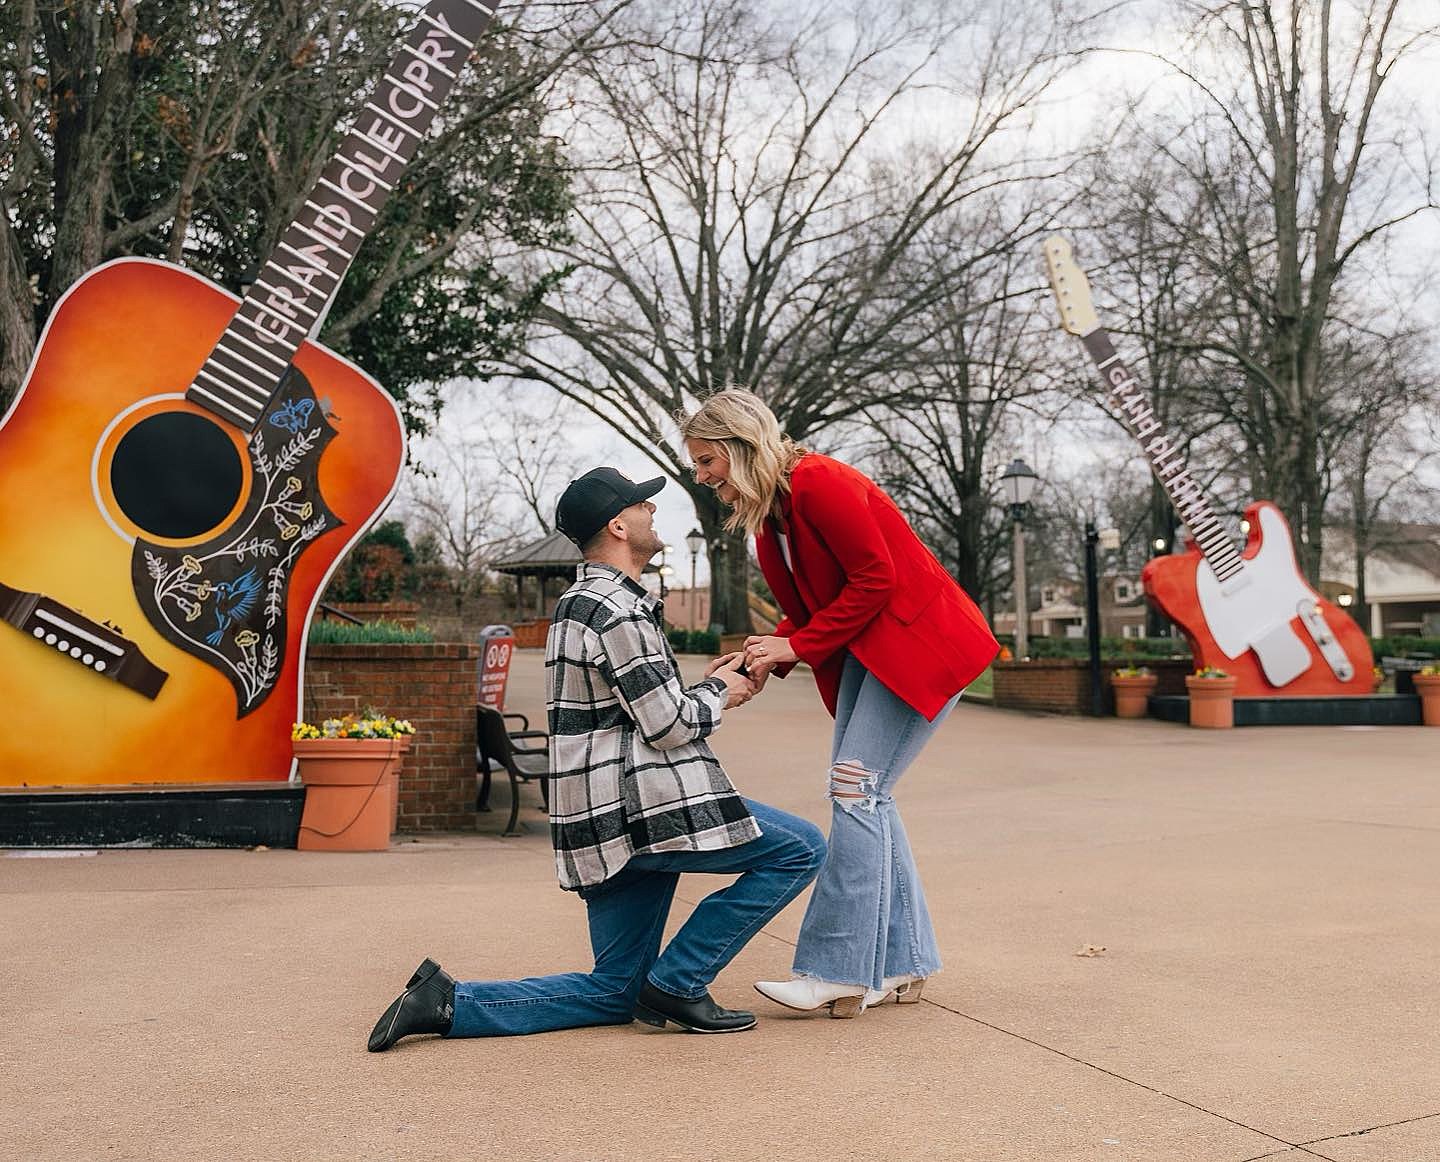 Tom Nitti Proposes to Girlfriend Ahead of 'The Voice' Audition